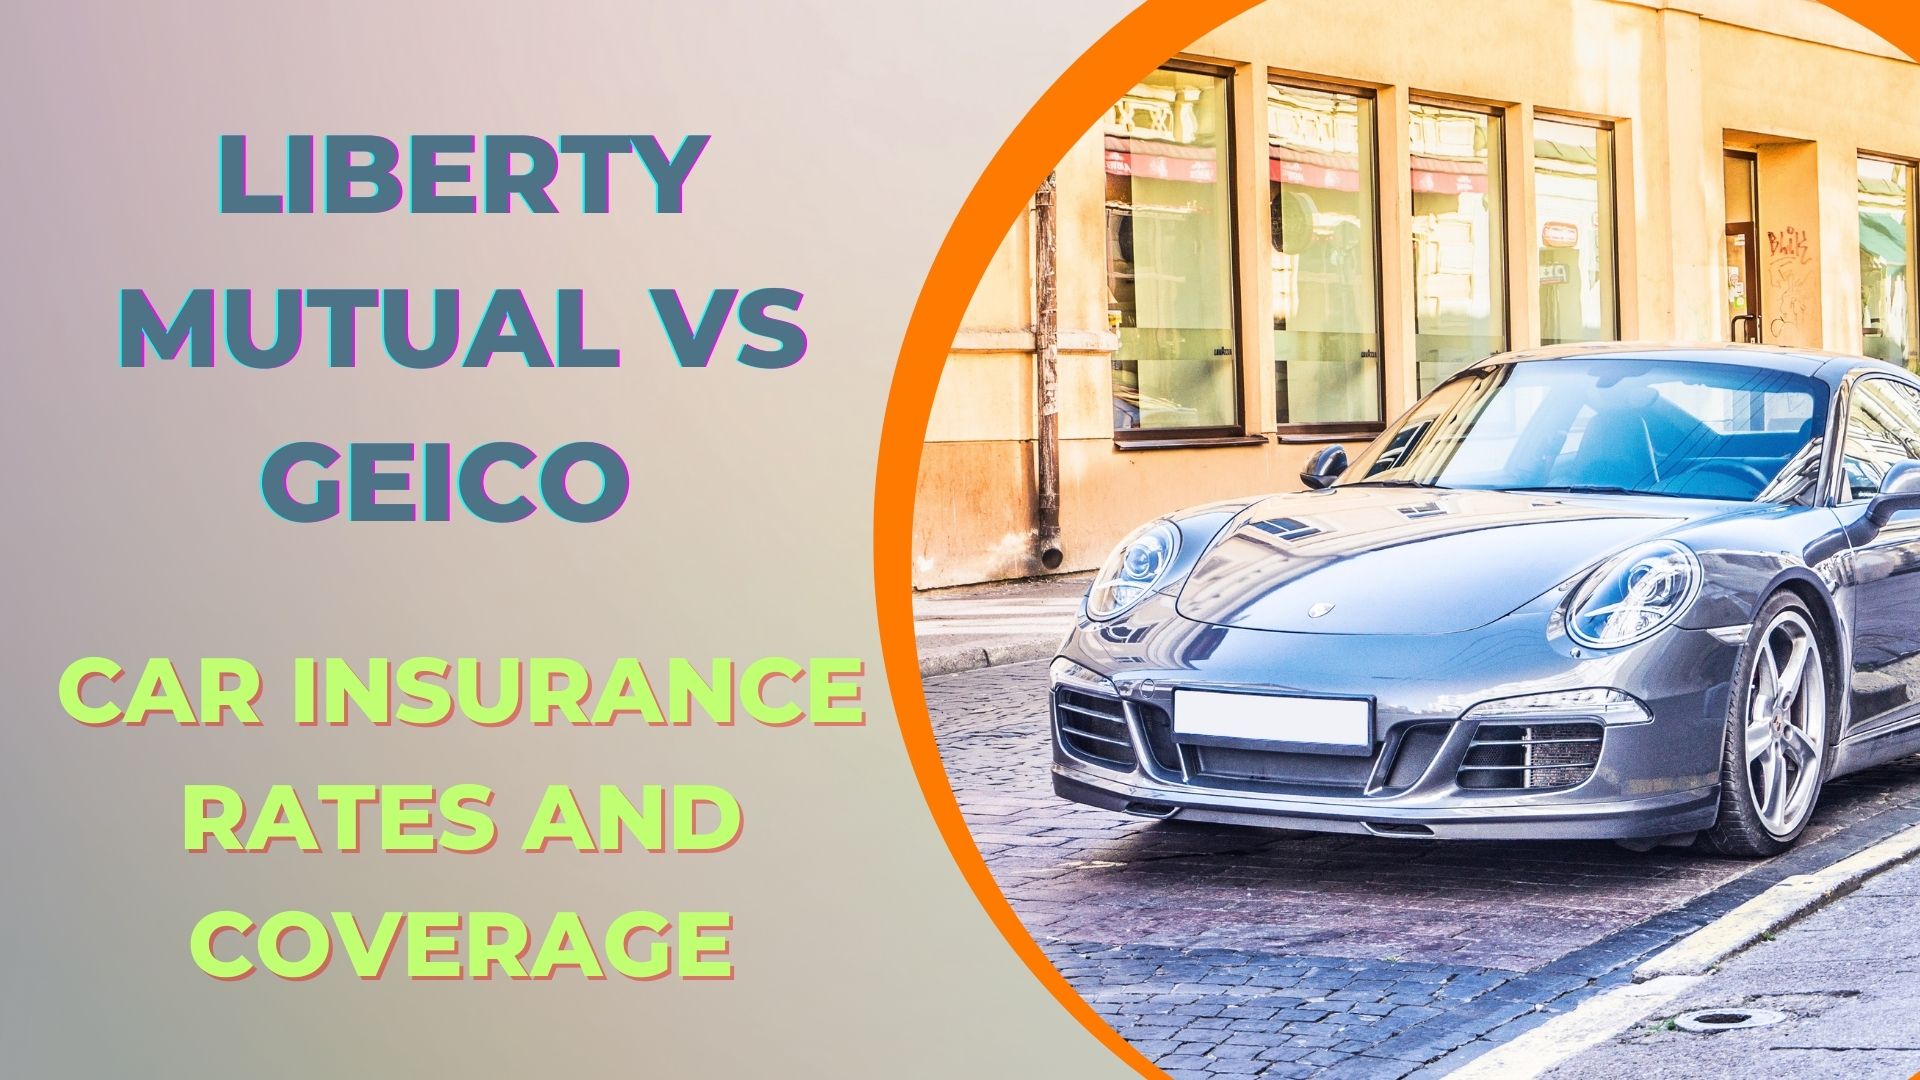 Liberty Mutual vs Geico | Car Insurance Rates and Coverage